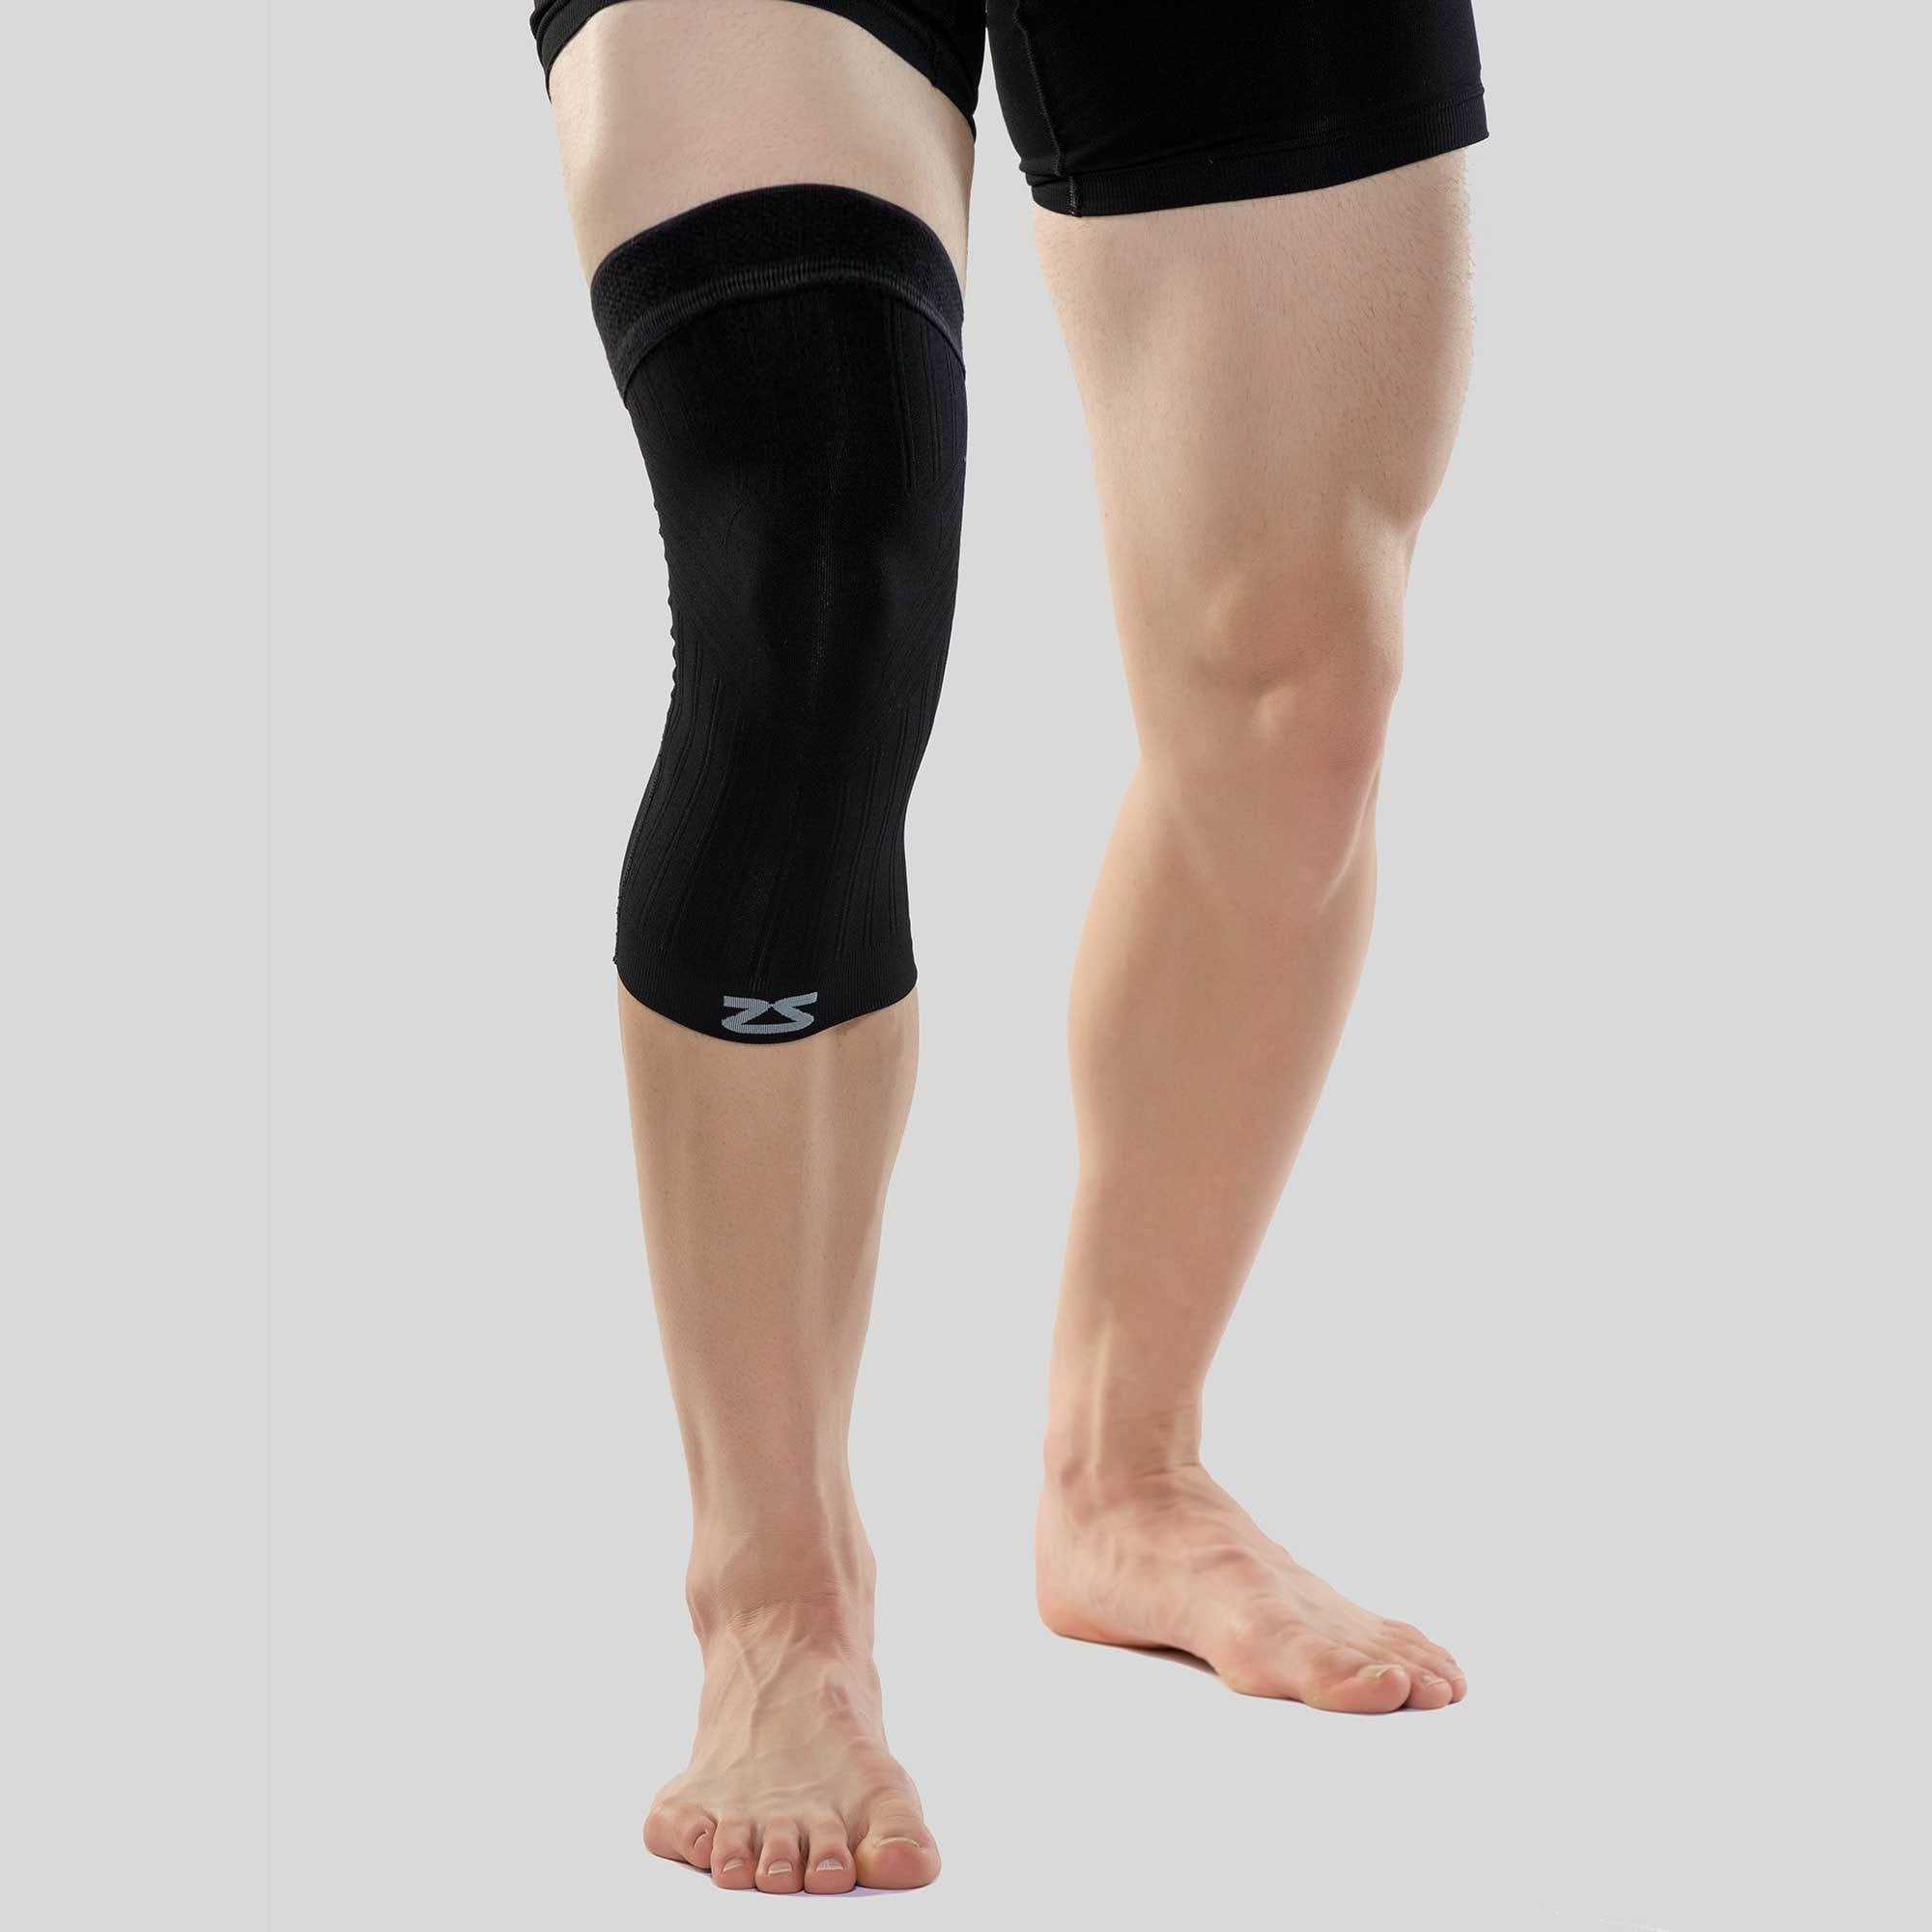 Thigh Compression Sleeve – Midwest Sports Medical